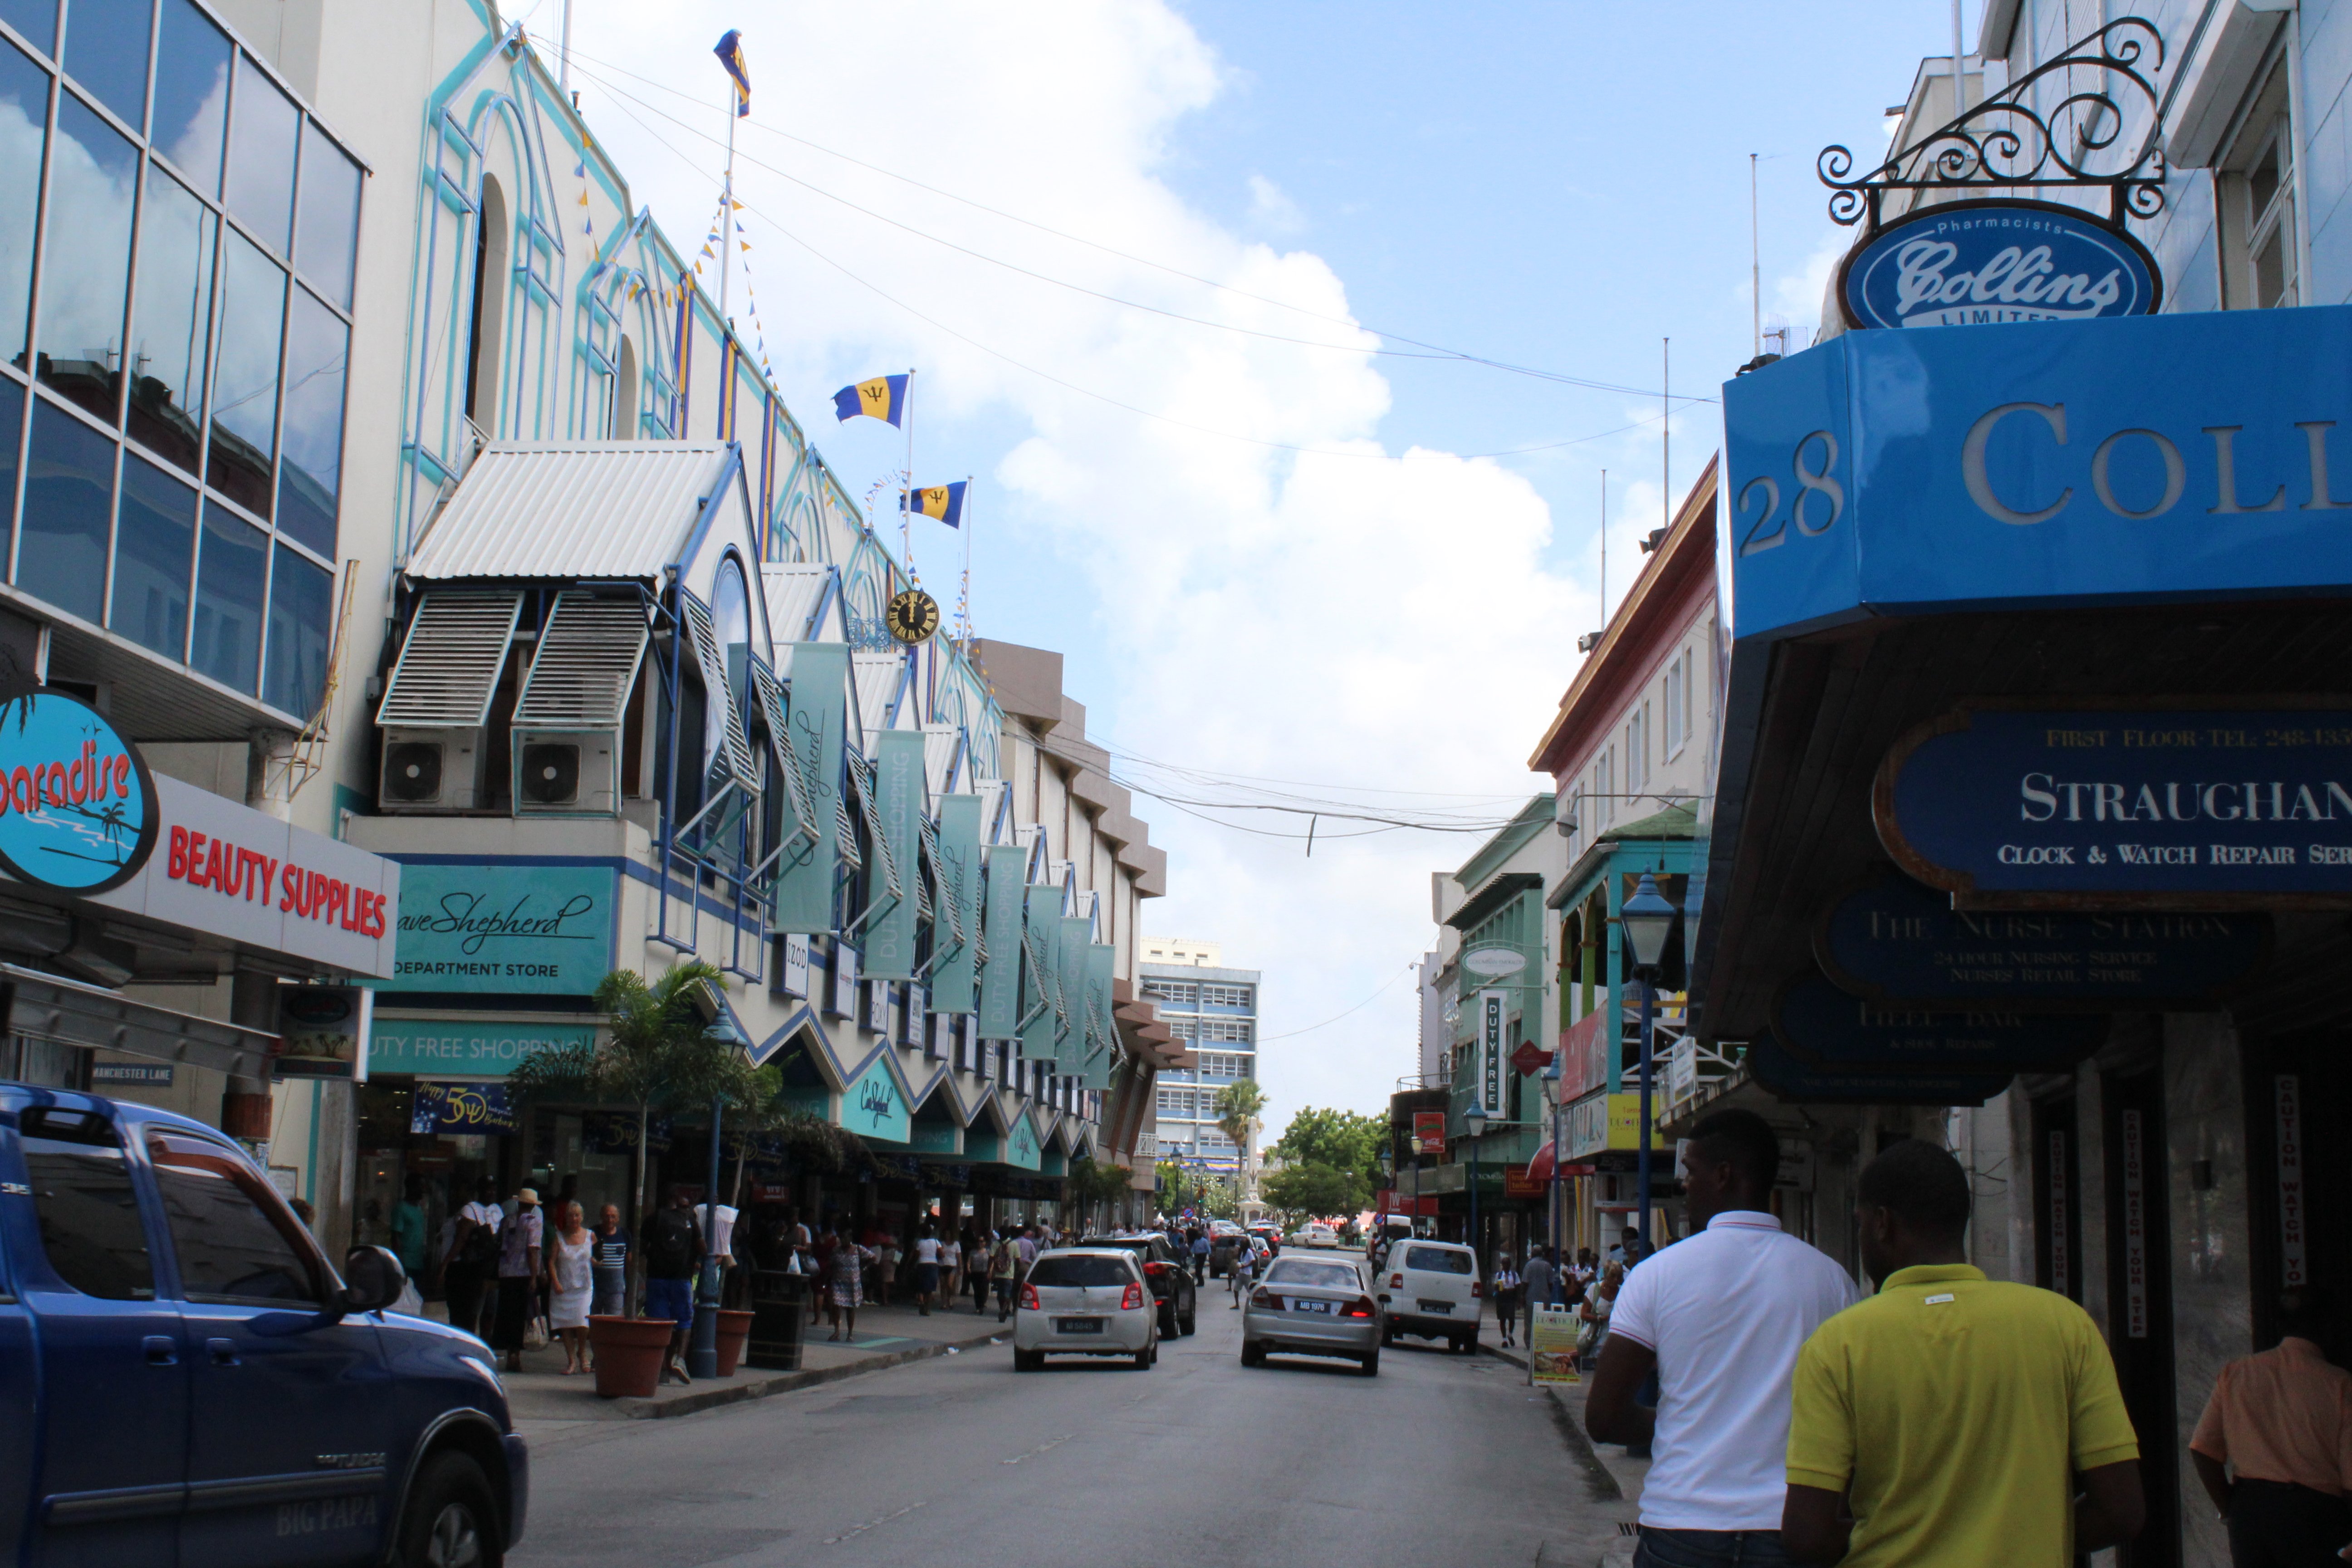 Narrow Streets filled with cars and pedestrians in Bridgetown Barbados